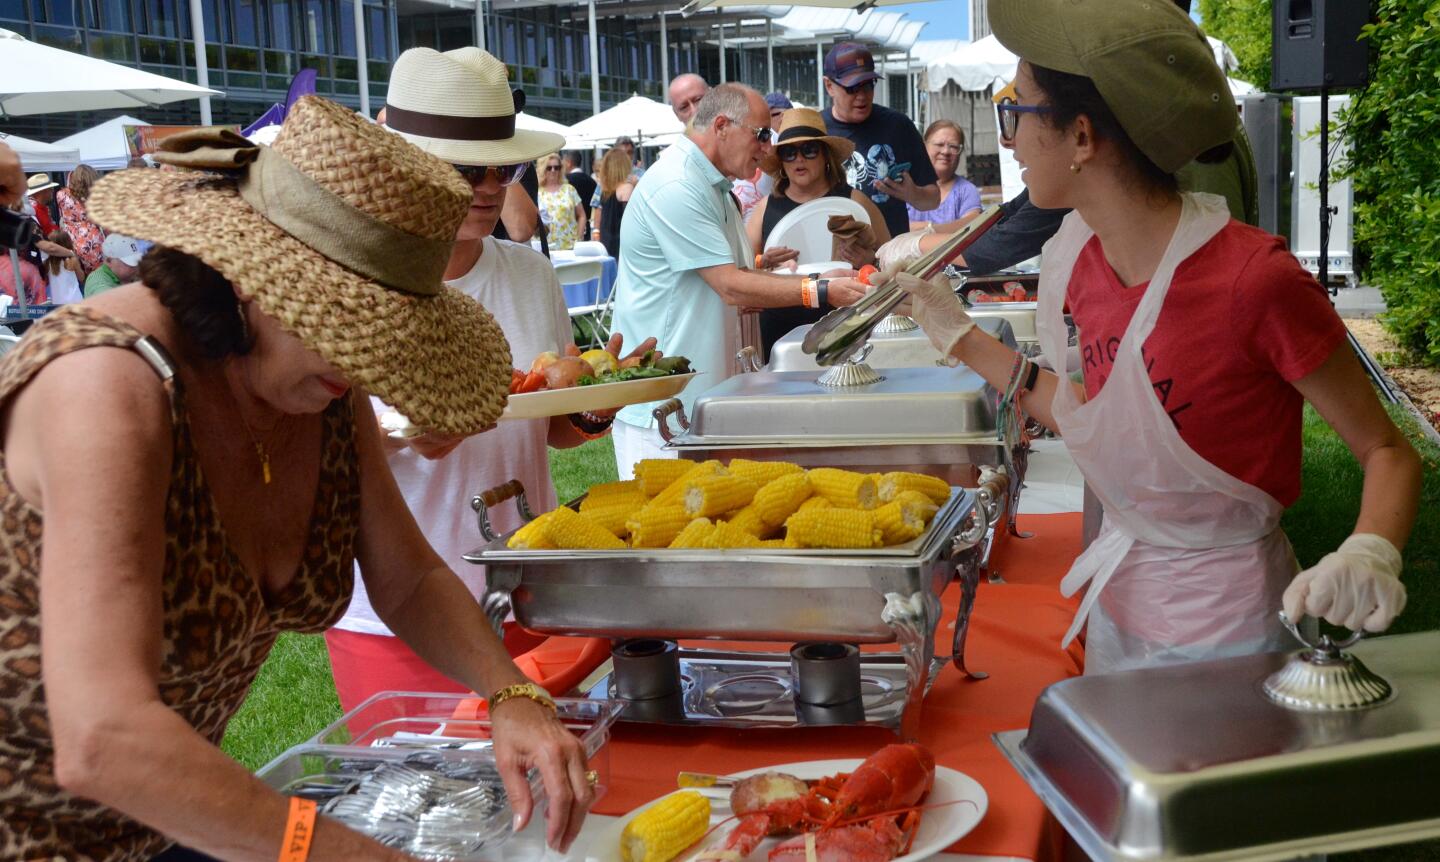 Guests line up for lobster, steak, potatoes, corn on the cob, rolls and salad during Lobsterfest on Sunday at the Newport Beach Civic Center.